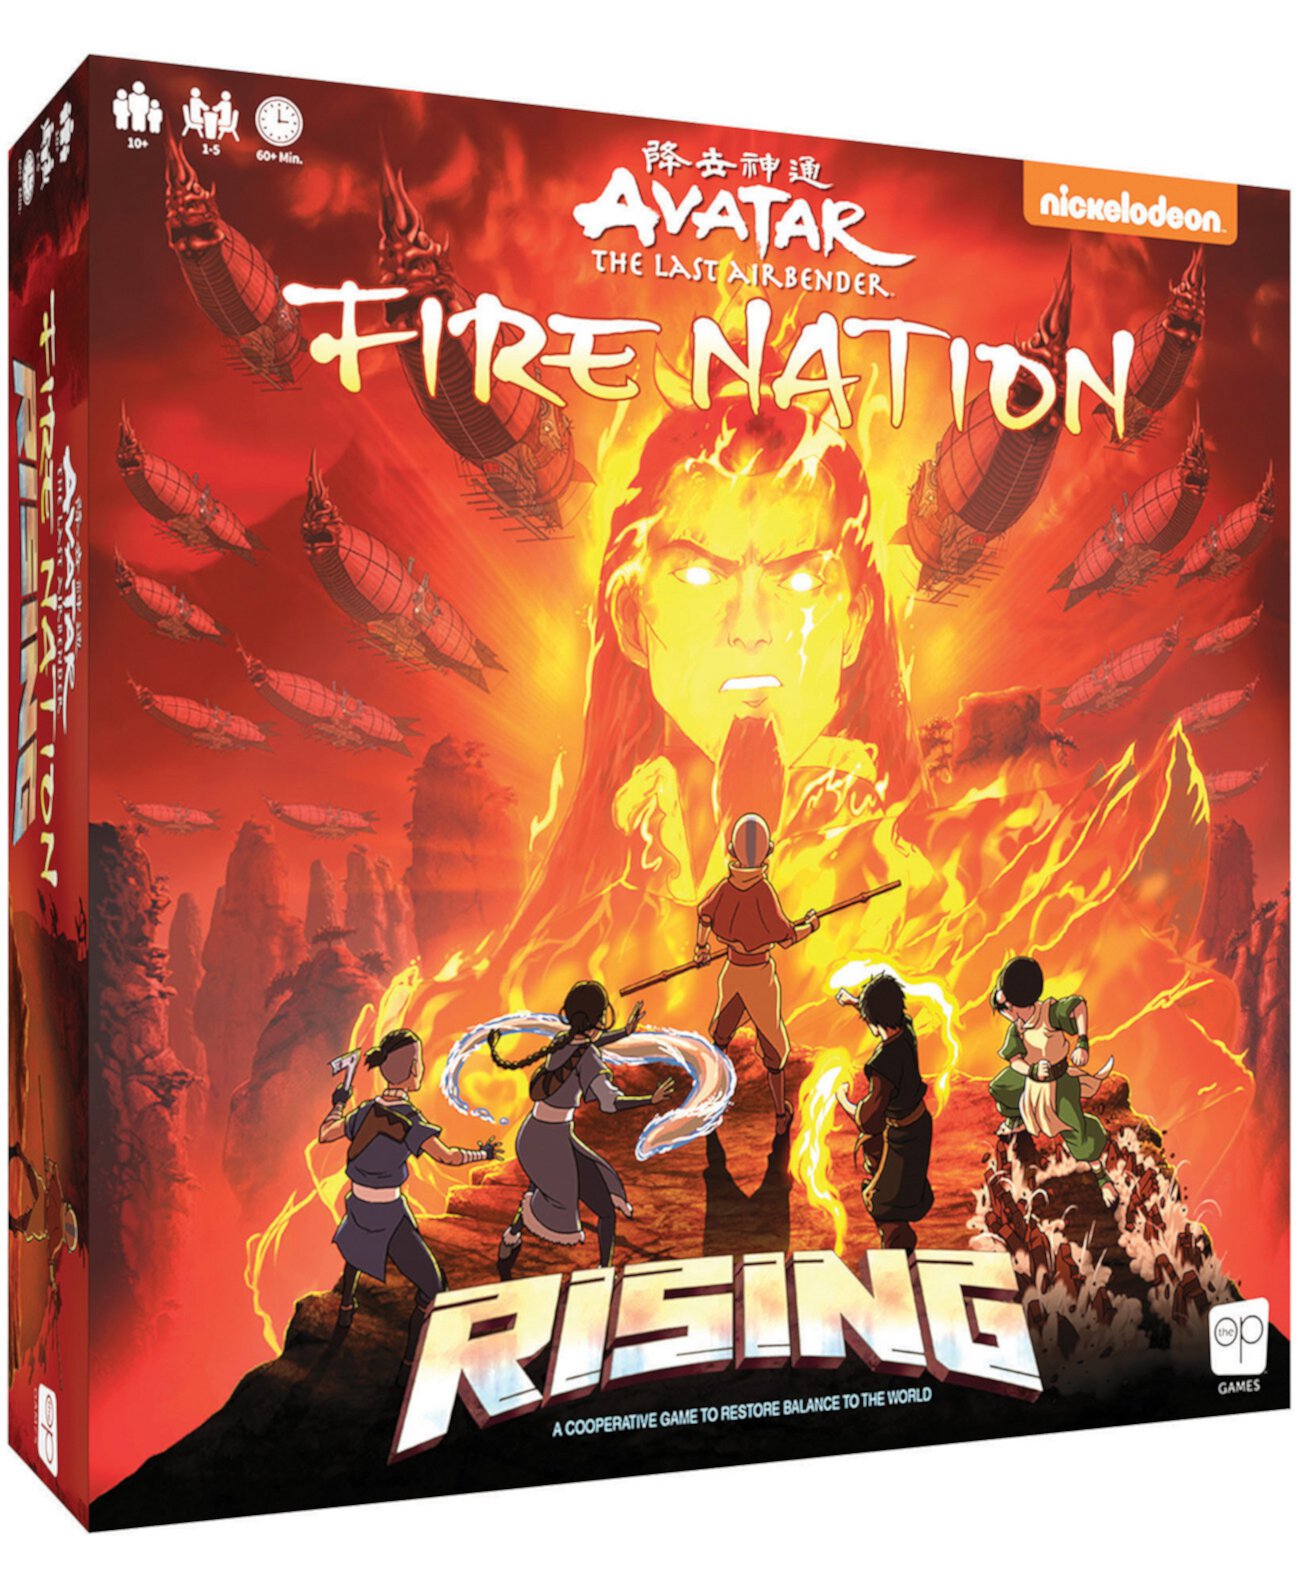 Аватар - Последняя игра Air Bender Fire Nation Rising USAopoly